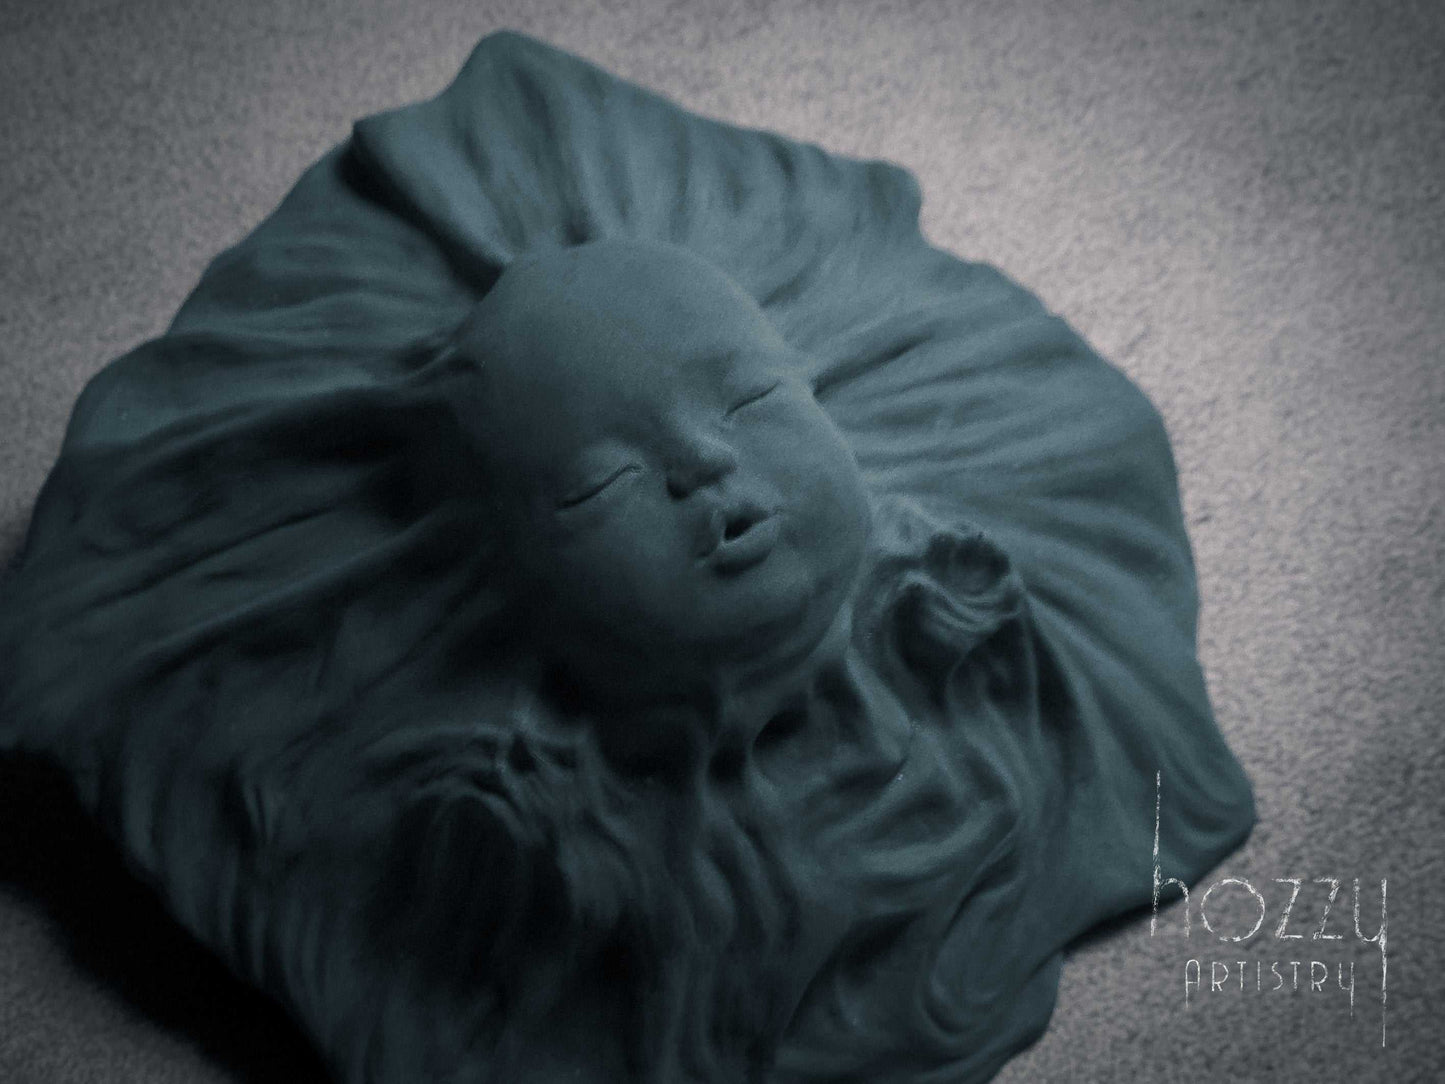 The Veiled BabyThe design takes inspiration from the timeless marble sculpture "The Veiled Virgin" by Italian artist Giovanni Strazza. The sculpture portrays a baby's face with a tHOZZY Artistry StoreHOZZY Artistry Store